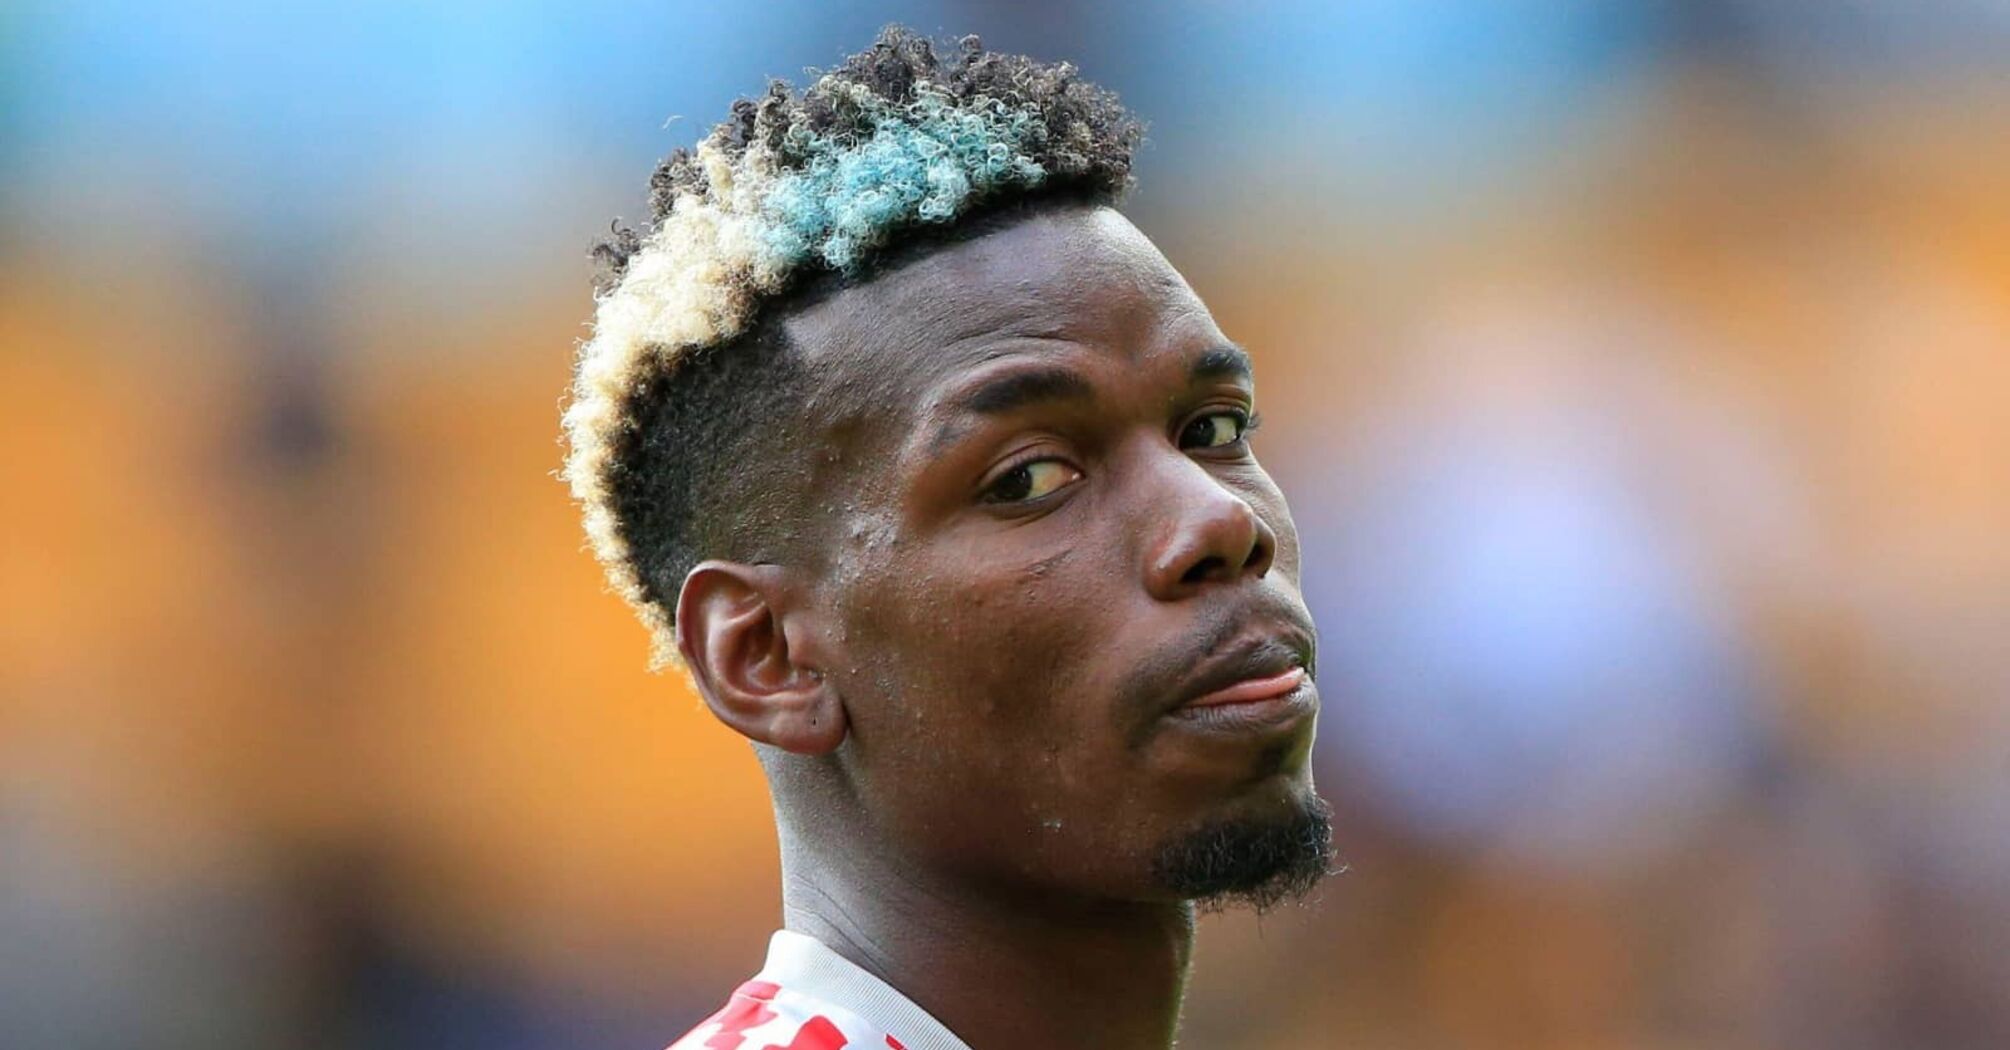 Paul Pogba has been banned for four years for doping